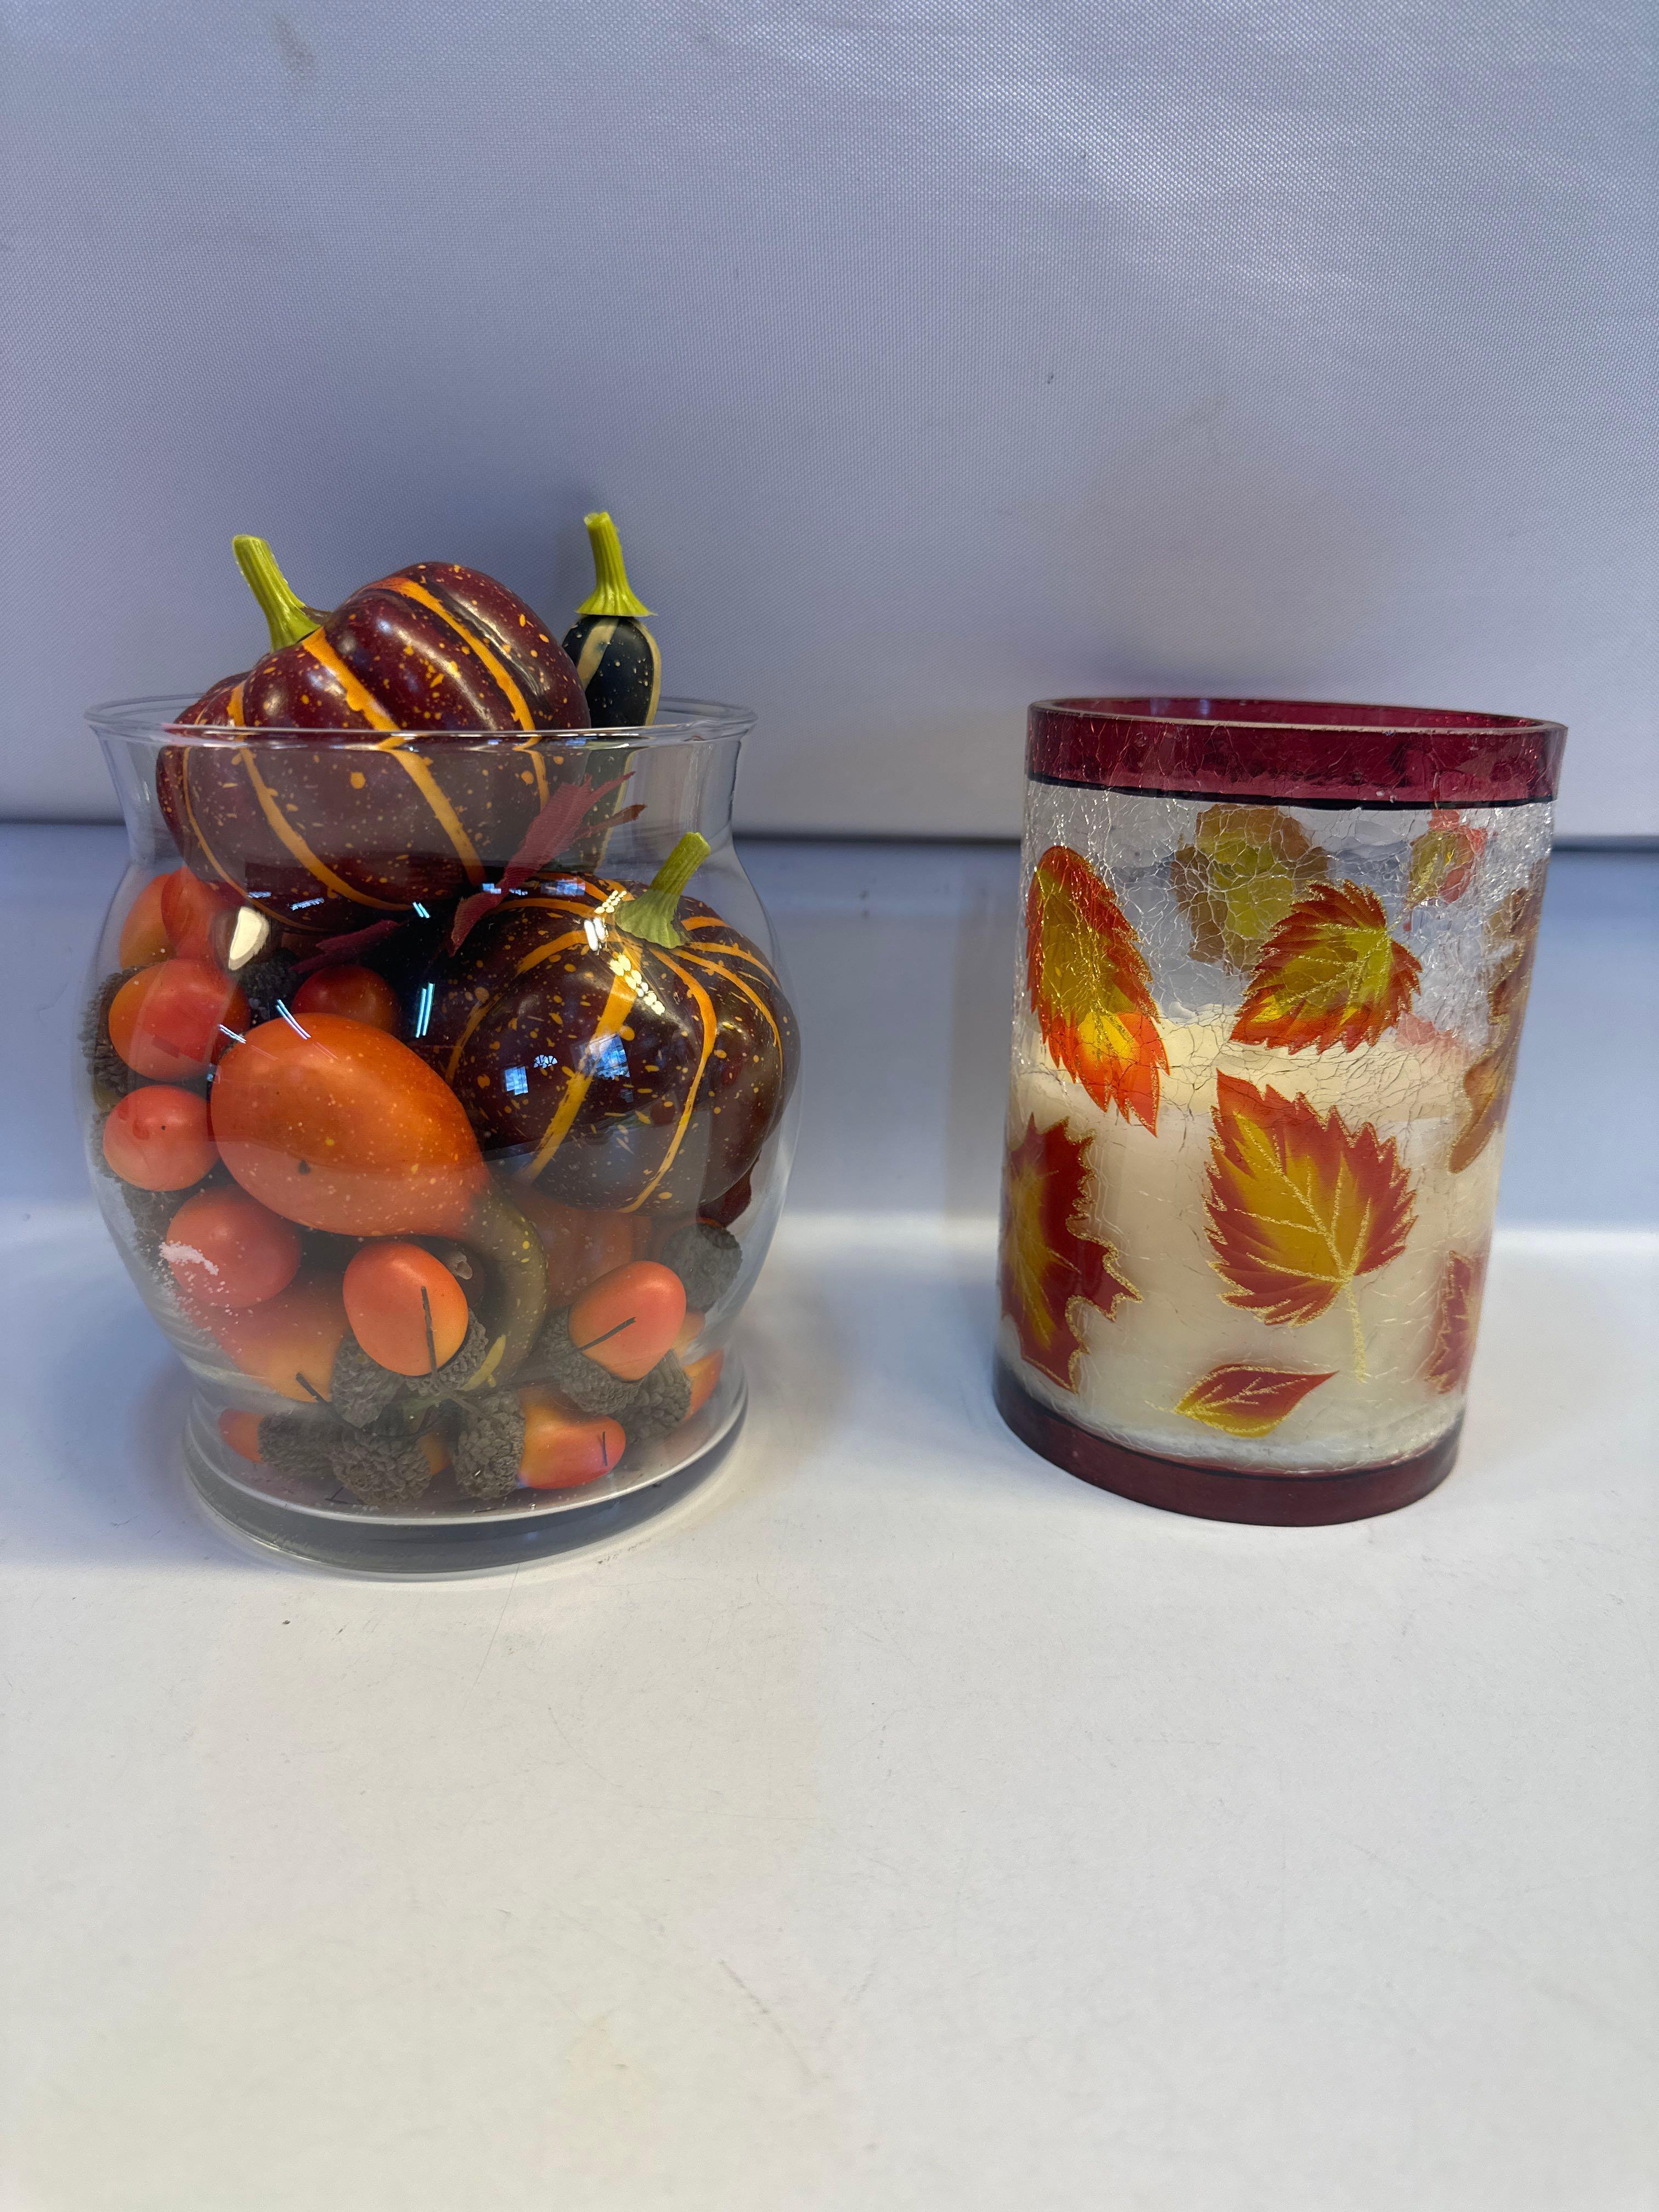 Fall LED Flameless Candle Crackle Glass/ Glass Vase With Fall Decor Inside